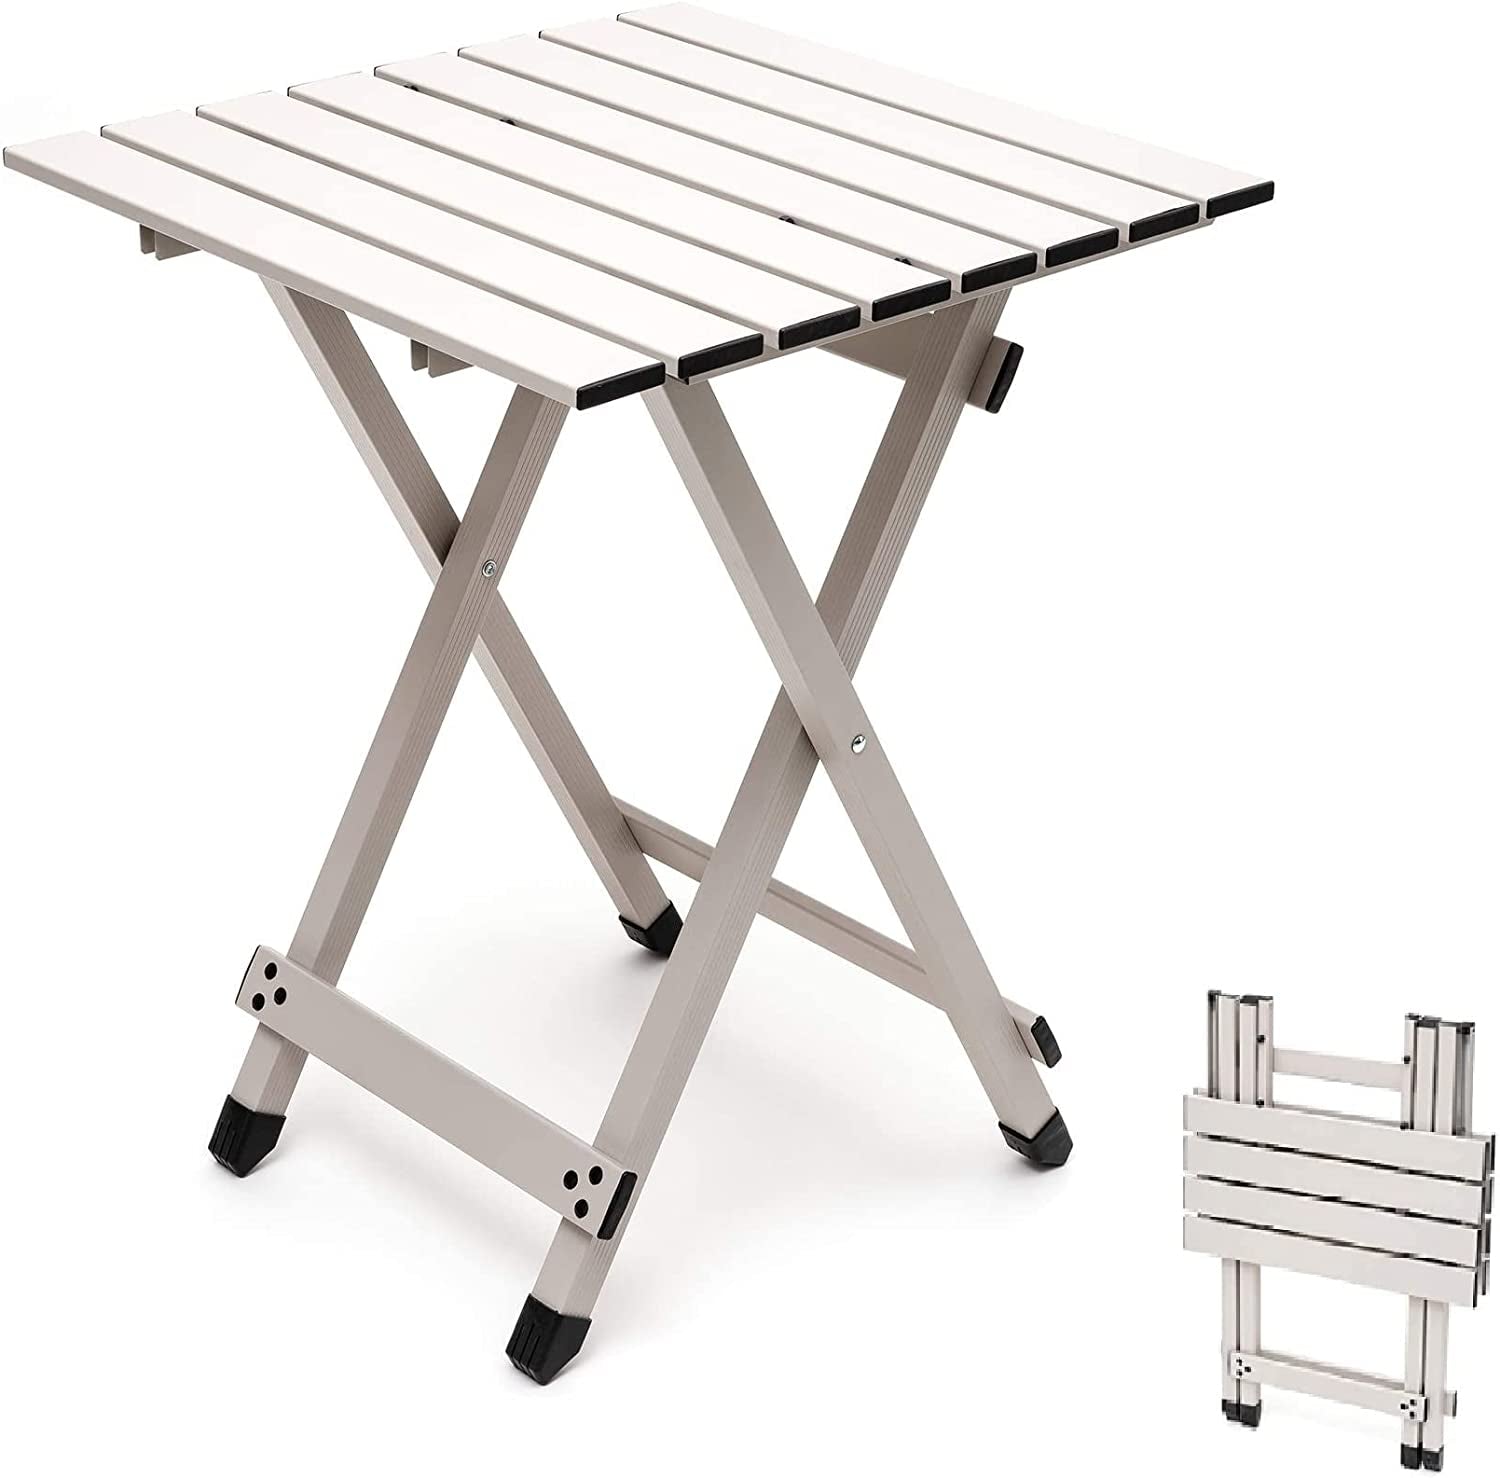 Folding Camping Table - Lightweight Aluminum Portable Picnic Table, 18.5X18.5X24.5 Inch for Cooking, Beach, Hiking, Travel, Fishing, BBQ, Indoor Outdoor Small Foldable Camp Tables (Grey)